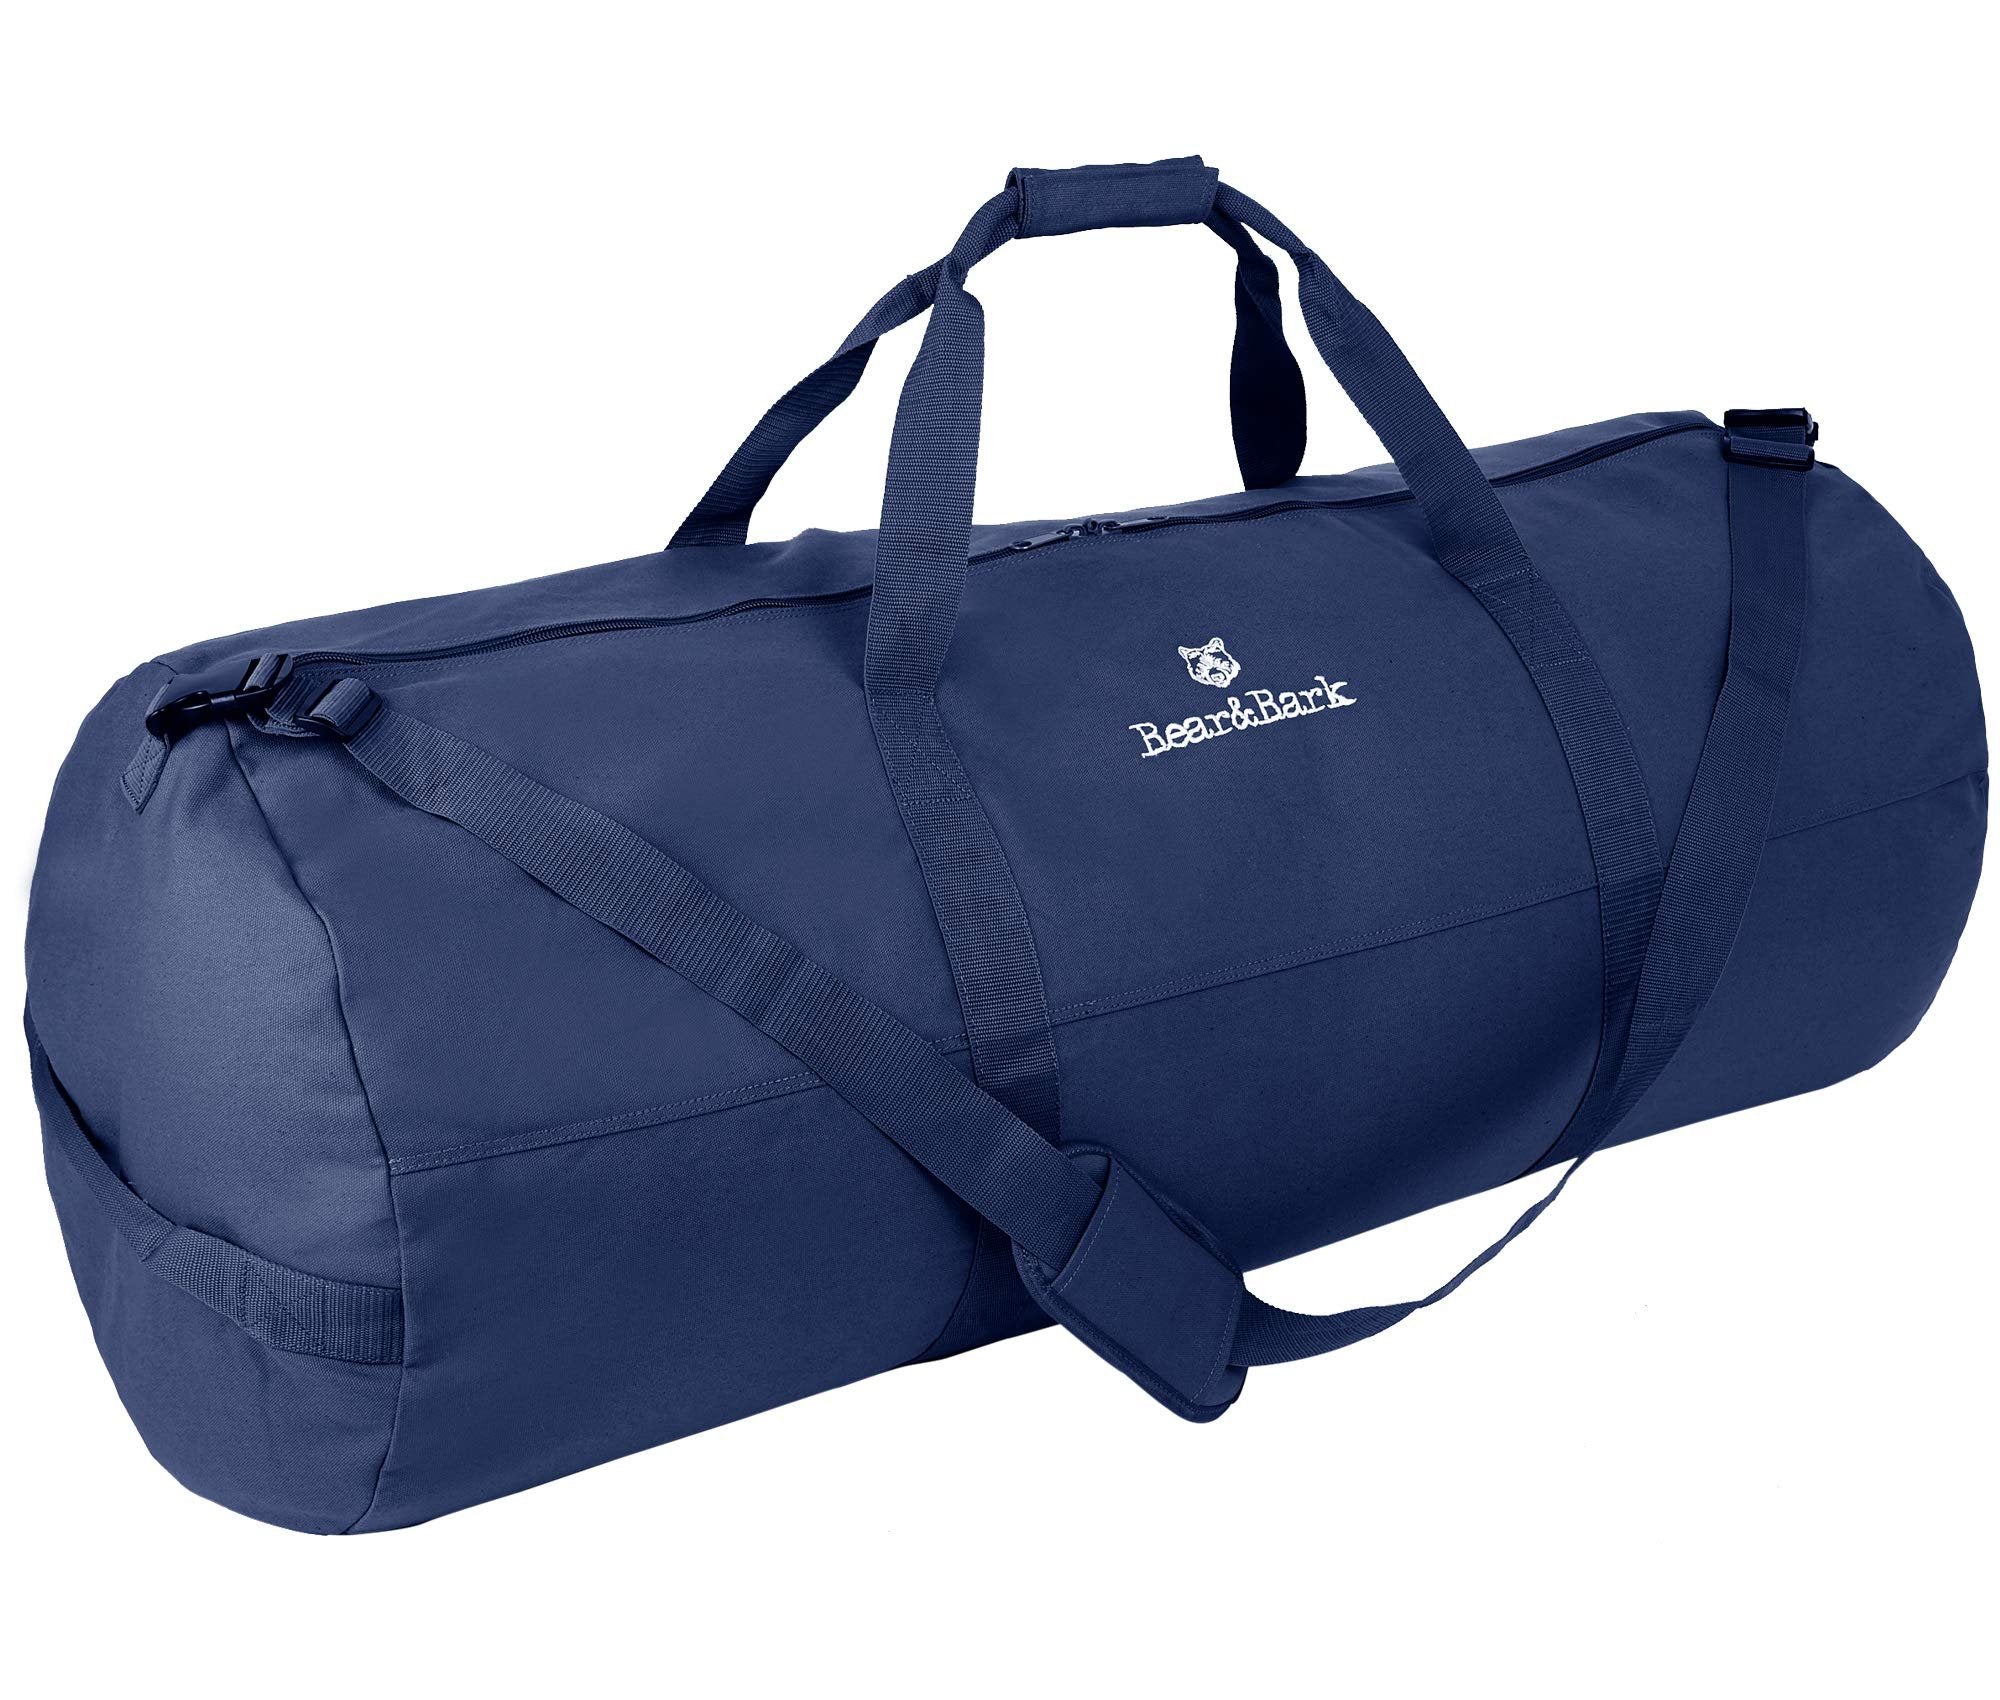 Extra Large Duffle Bag - Blue 46"x20" - 236.8L - Canvas Military and Army Cargo Style Duffel Tote for Men and Women - College Student, Dorm, Backpacking, X-Large Travel and Storage Shoulder Bag